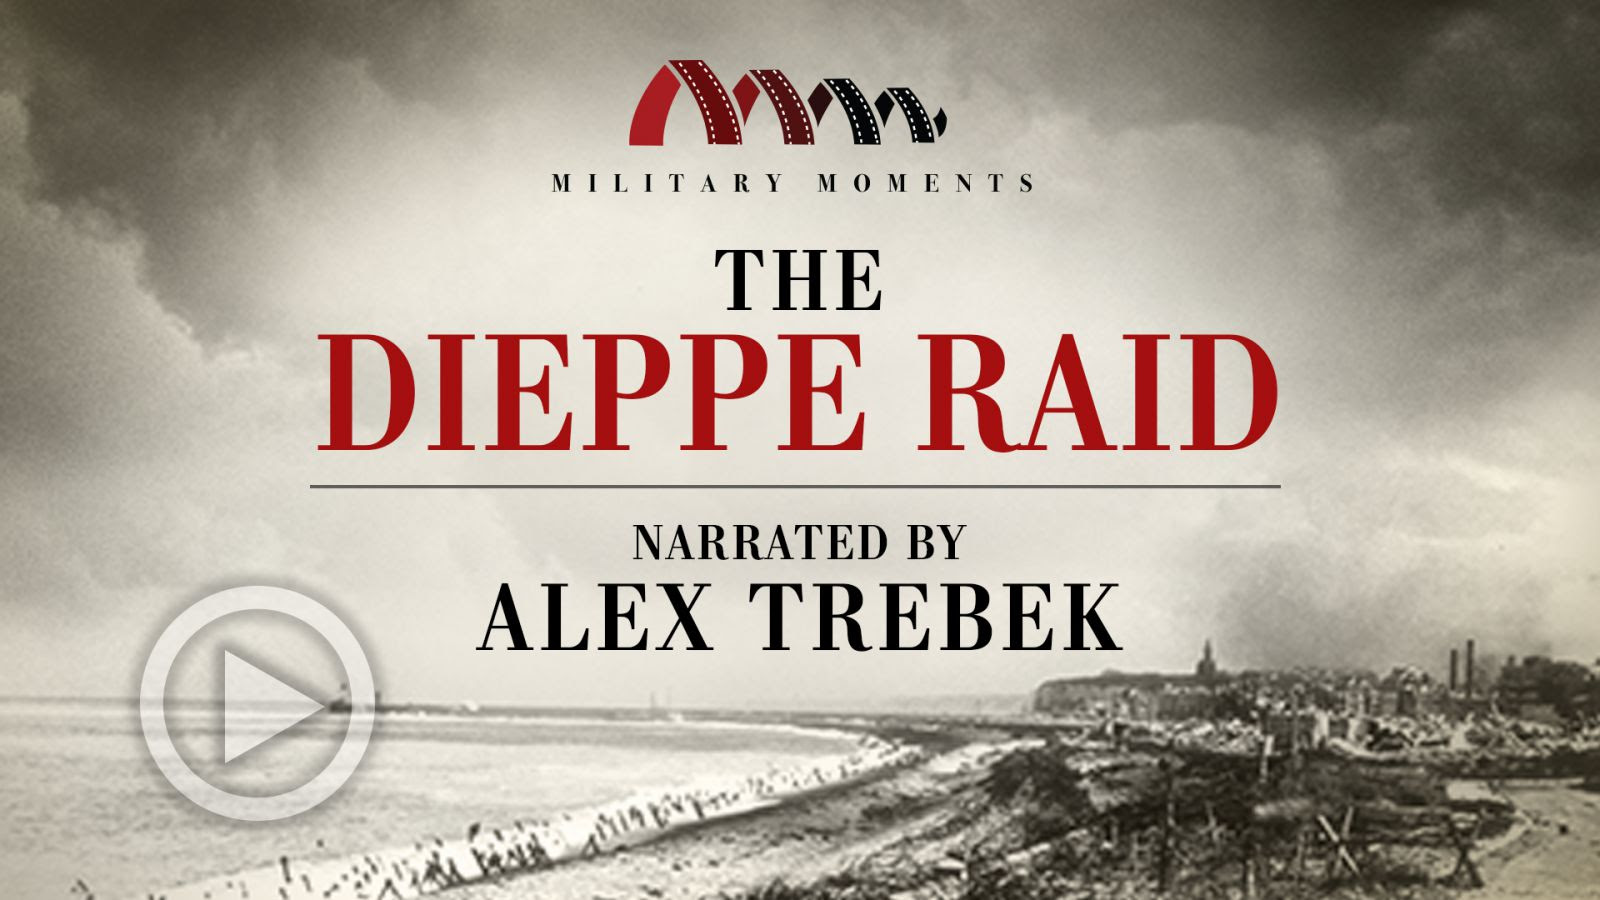 Military Moments | The Dieppe Raid Narrated by Alex Trebek